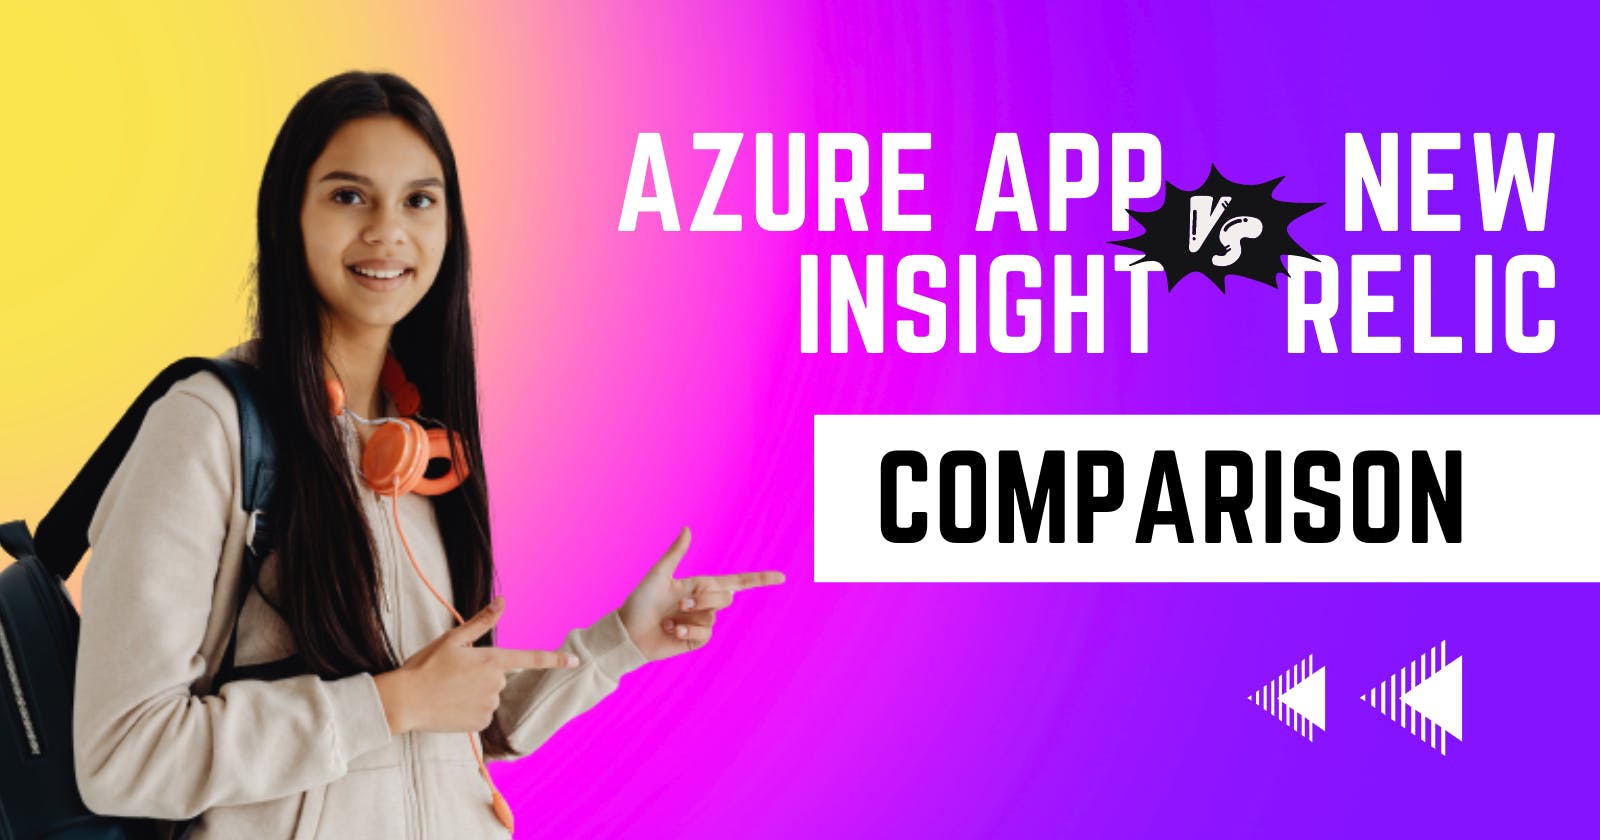 Comparing Azure Application Insights with New Relic: Pros and Cons